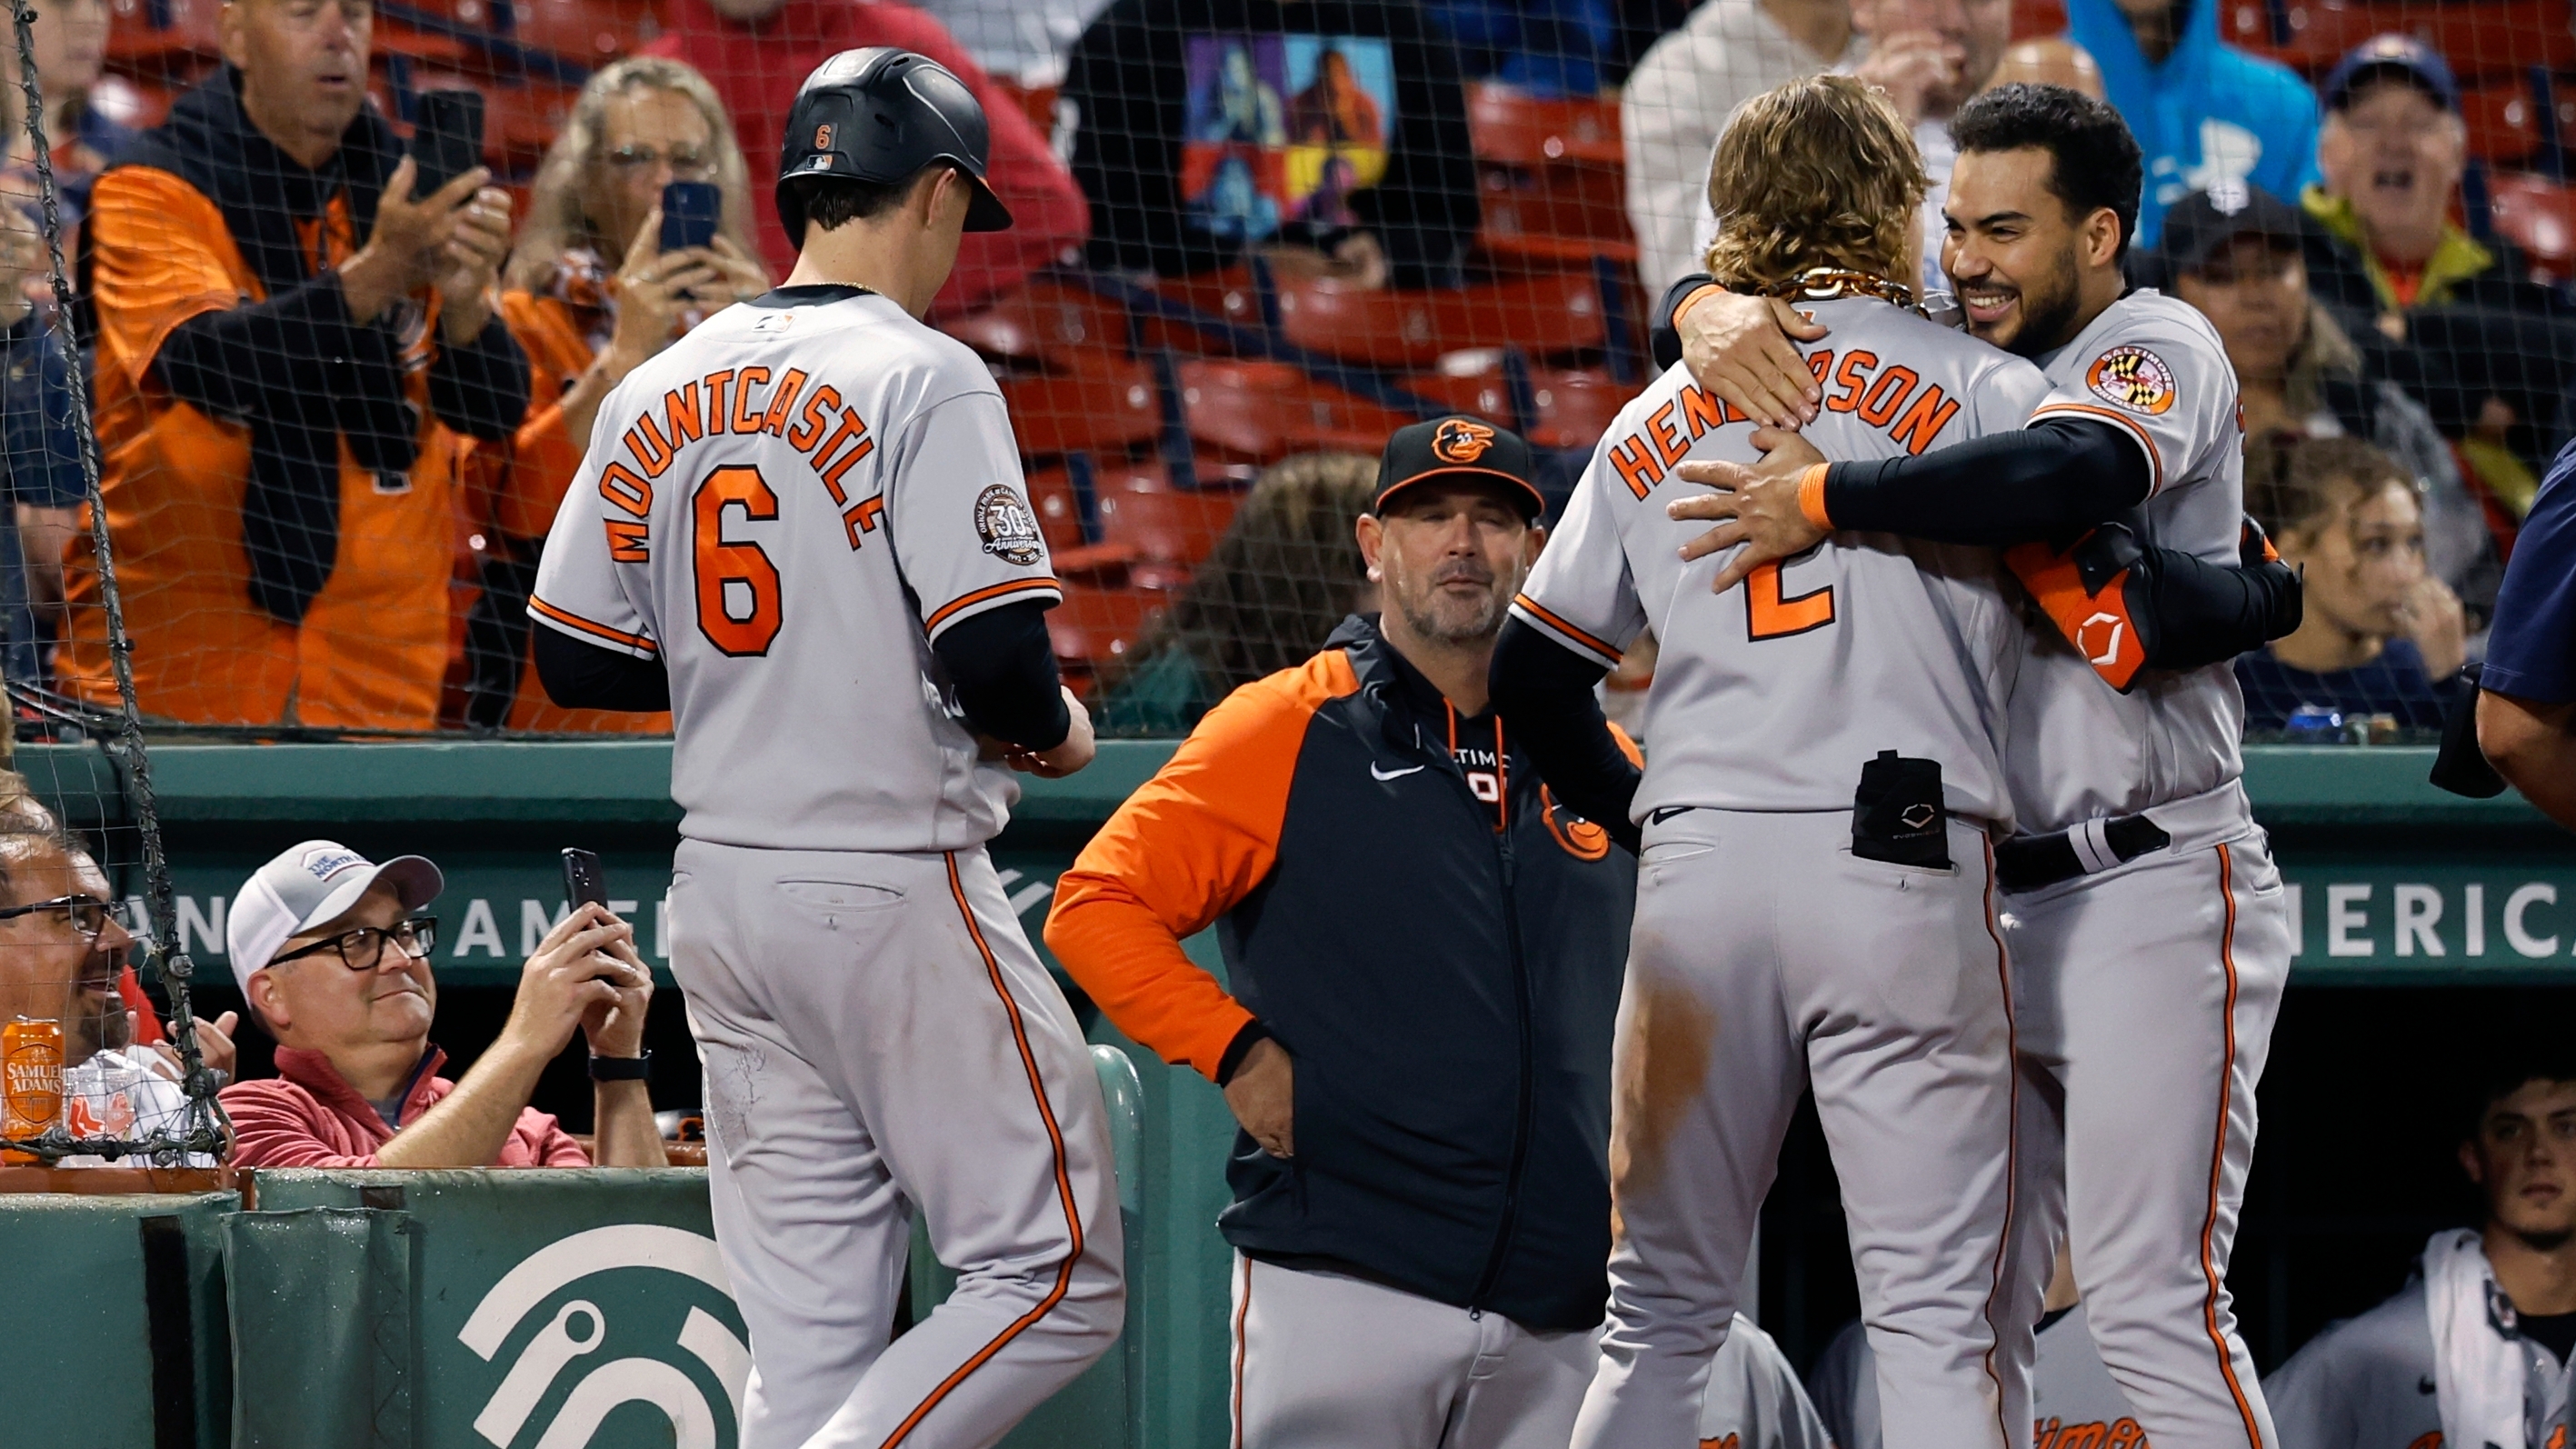 Orioles sidestep 20th loss in a row